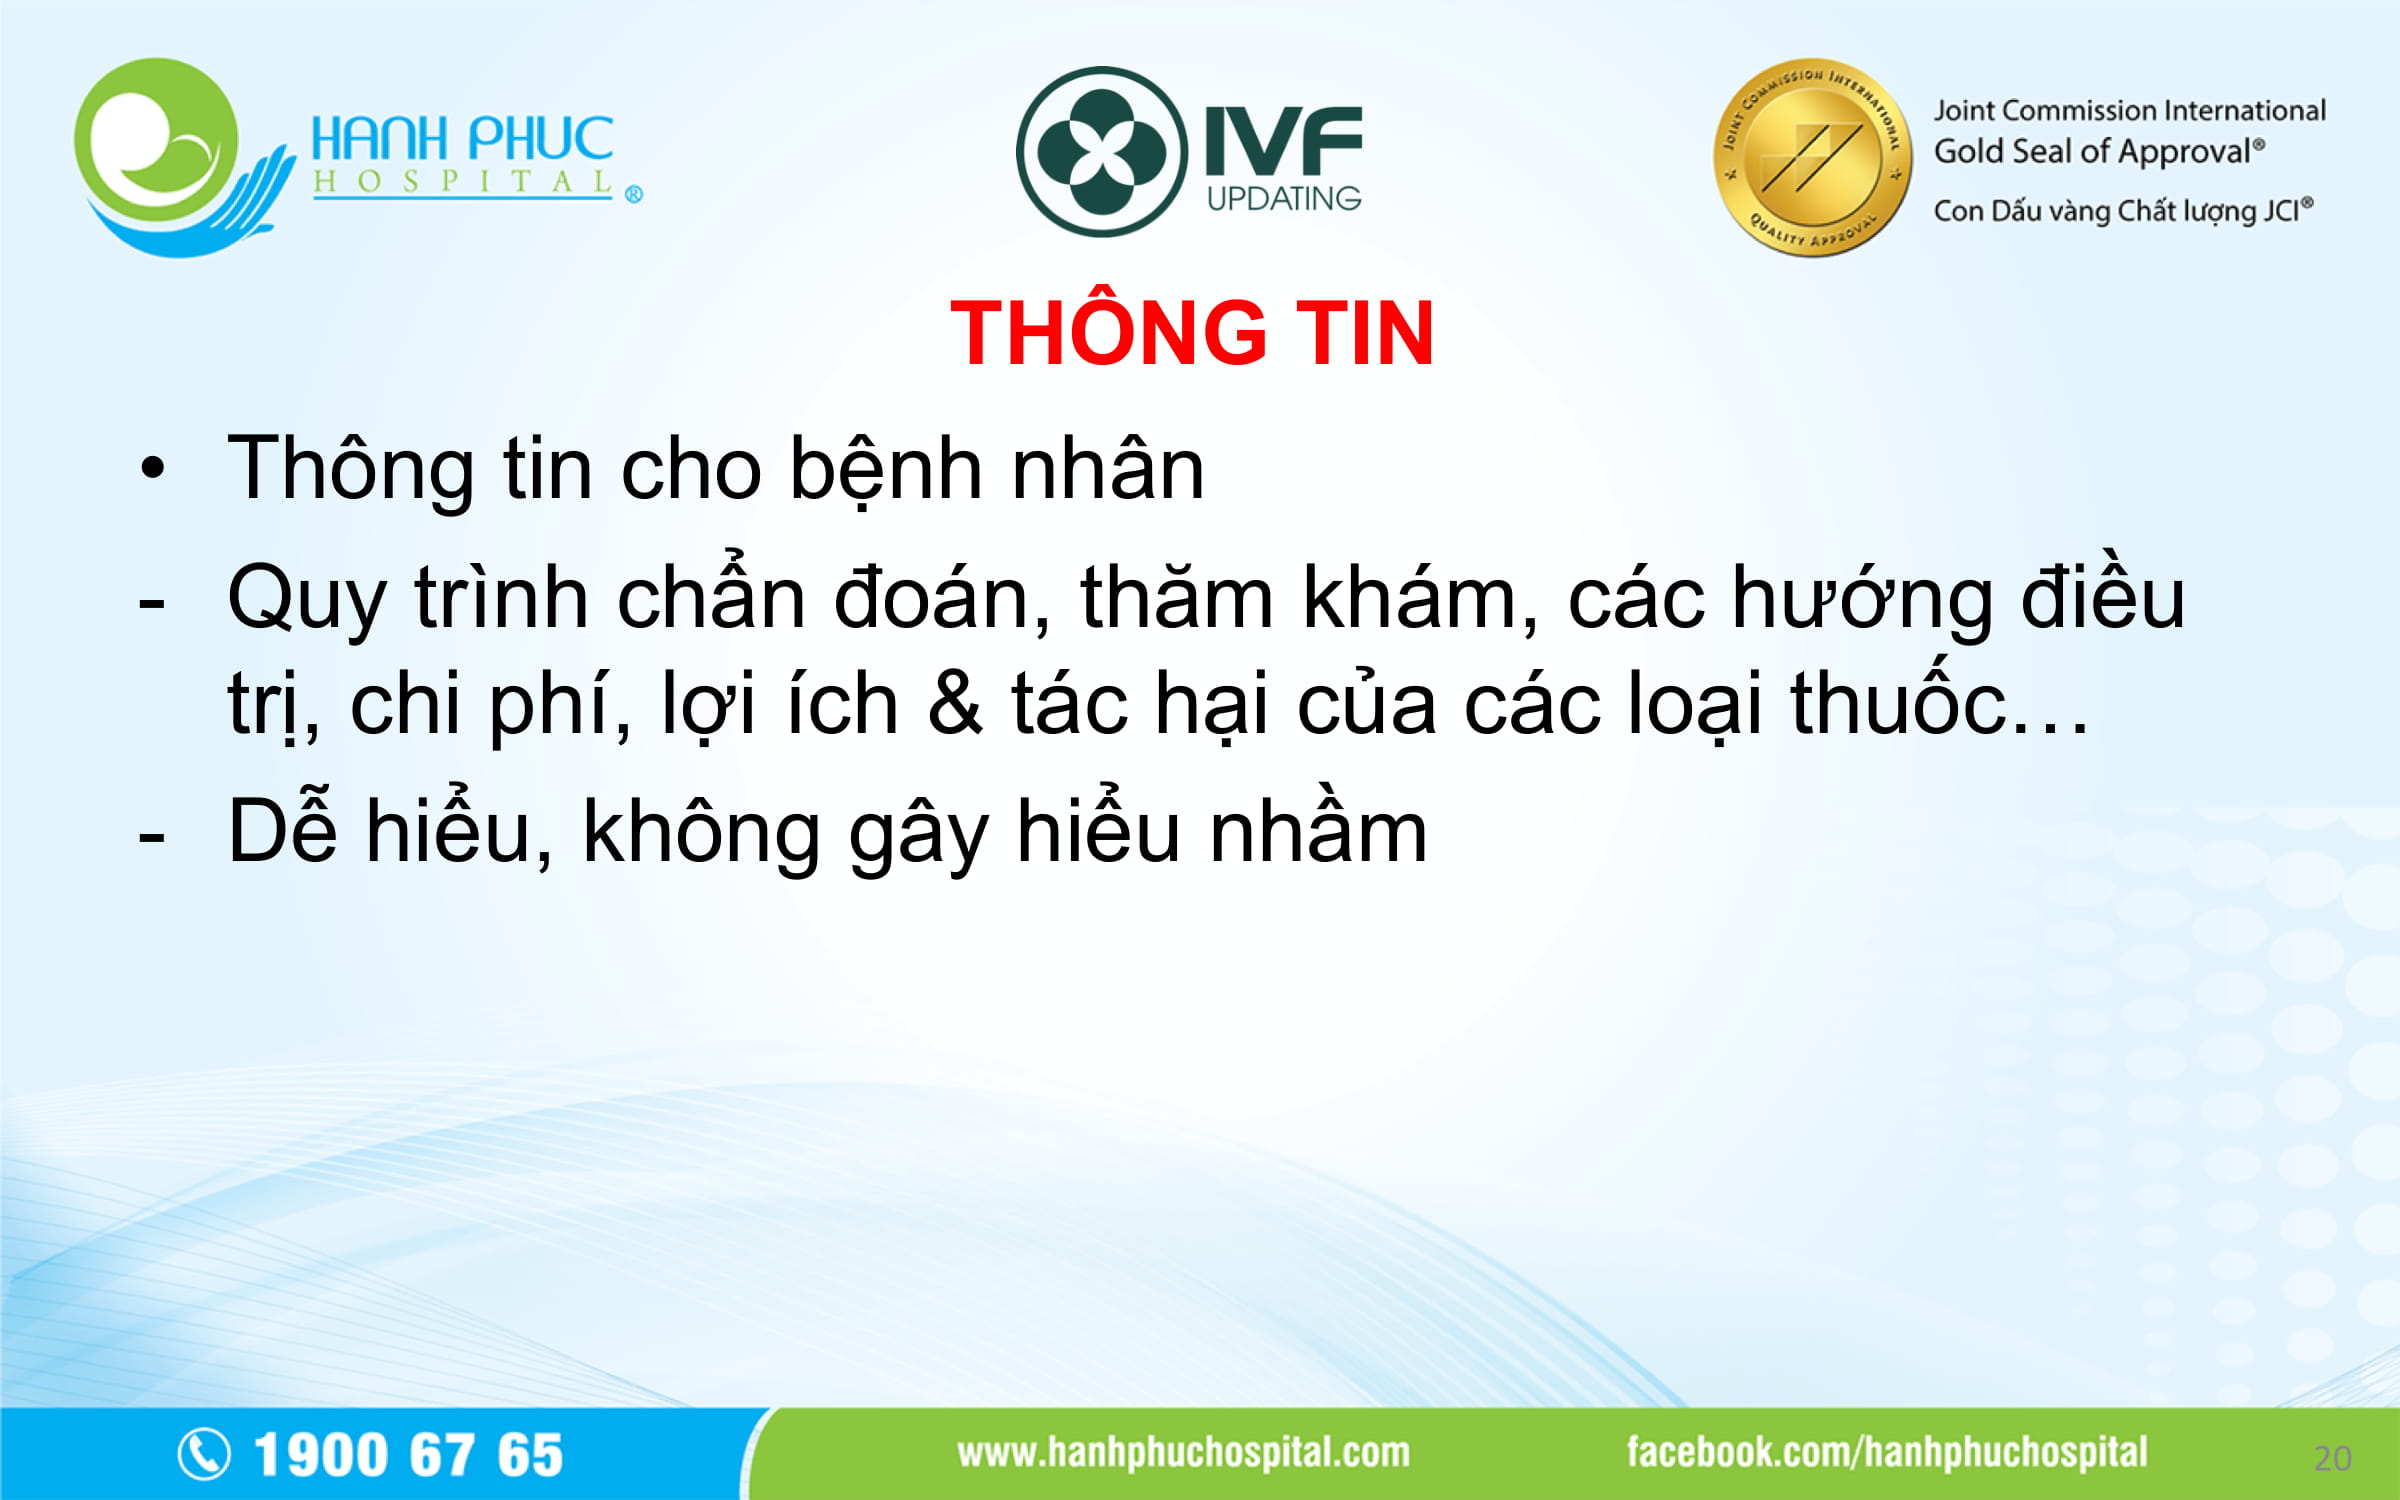 BS Vo Thien An Report_IVF UPDATING 5-20